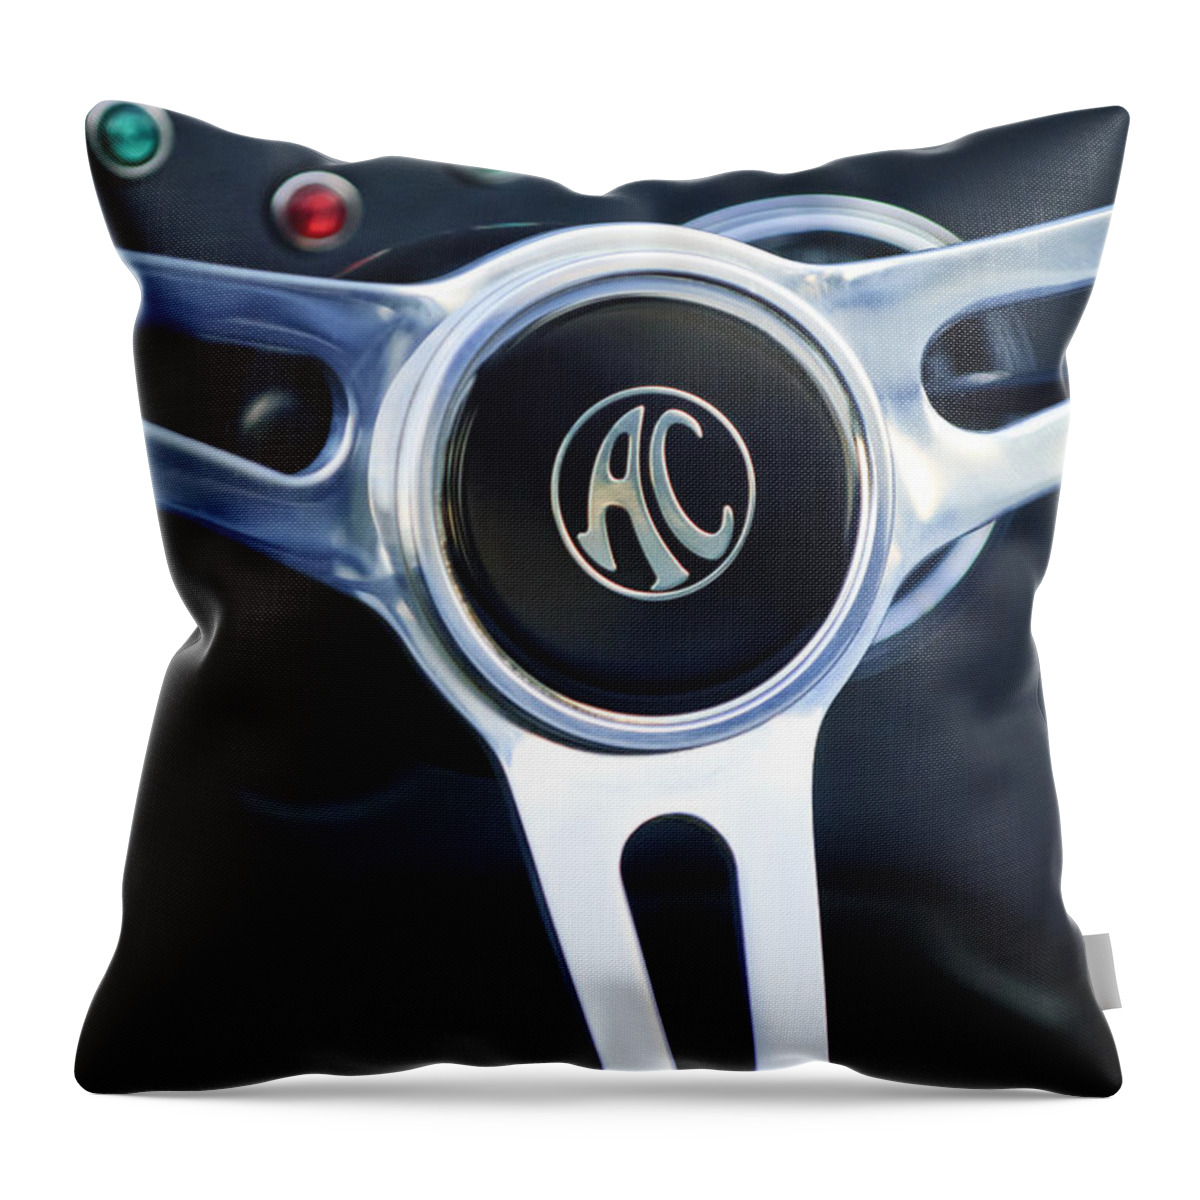 Shelby Ac Cobra Throw Pillow featuring the photograph Shelby AC Cobra Steering Wheel 4 by Jill Reger